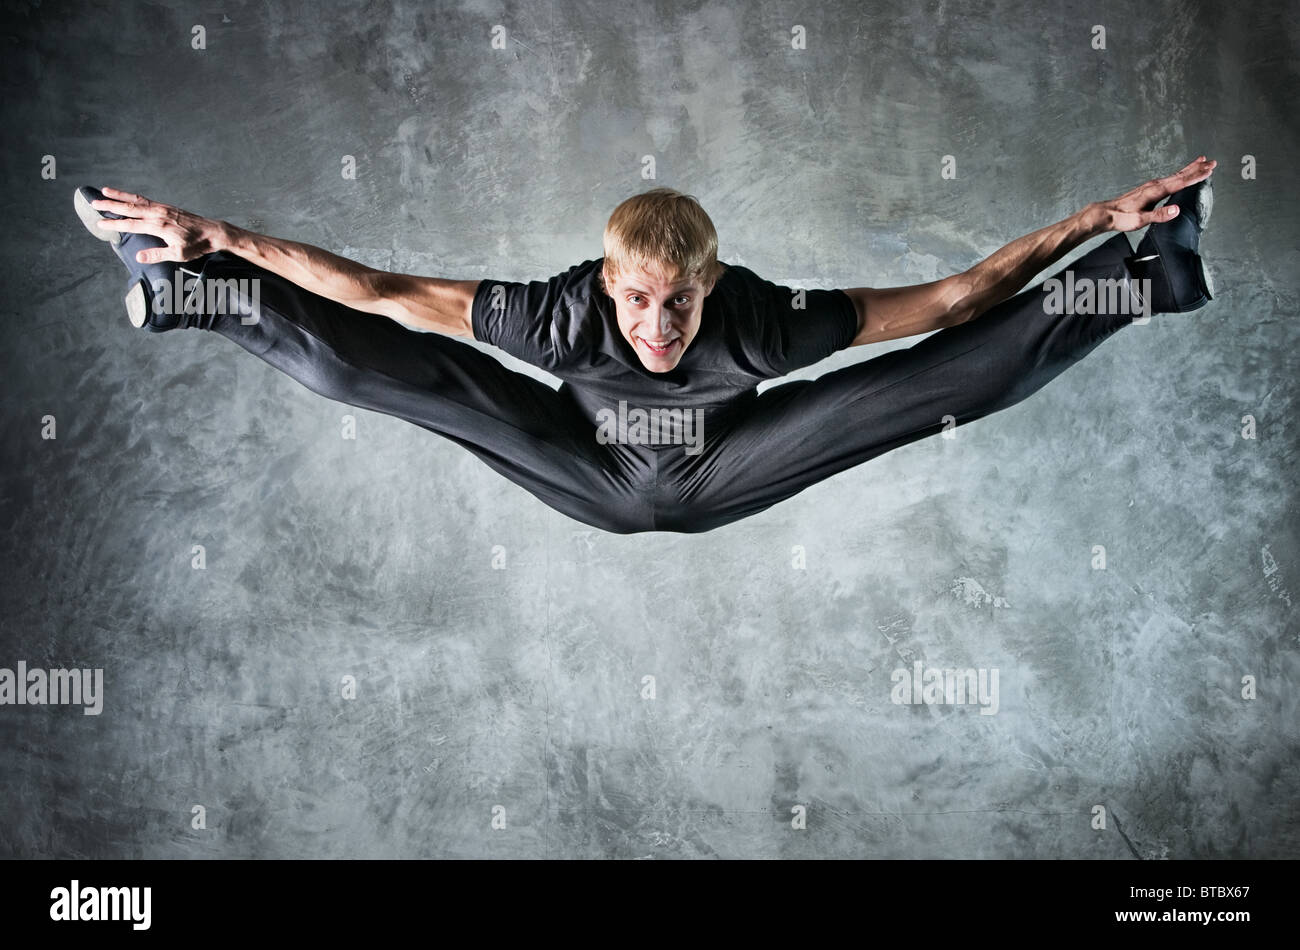 Young man dancer jumping up high. On wall background. Stock Photo